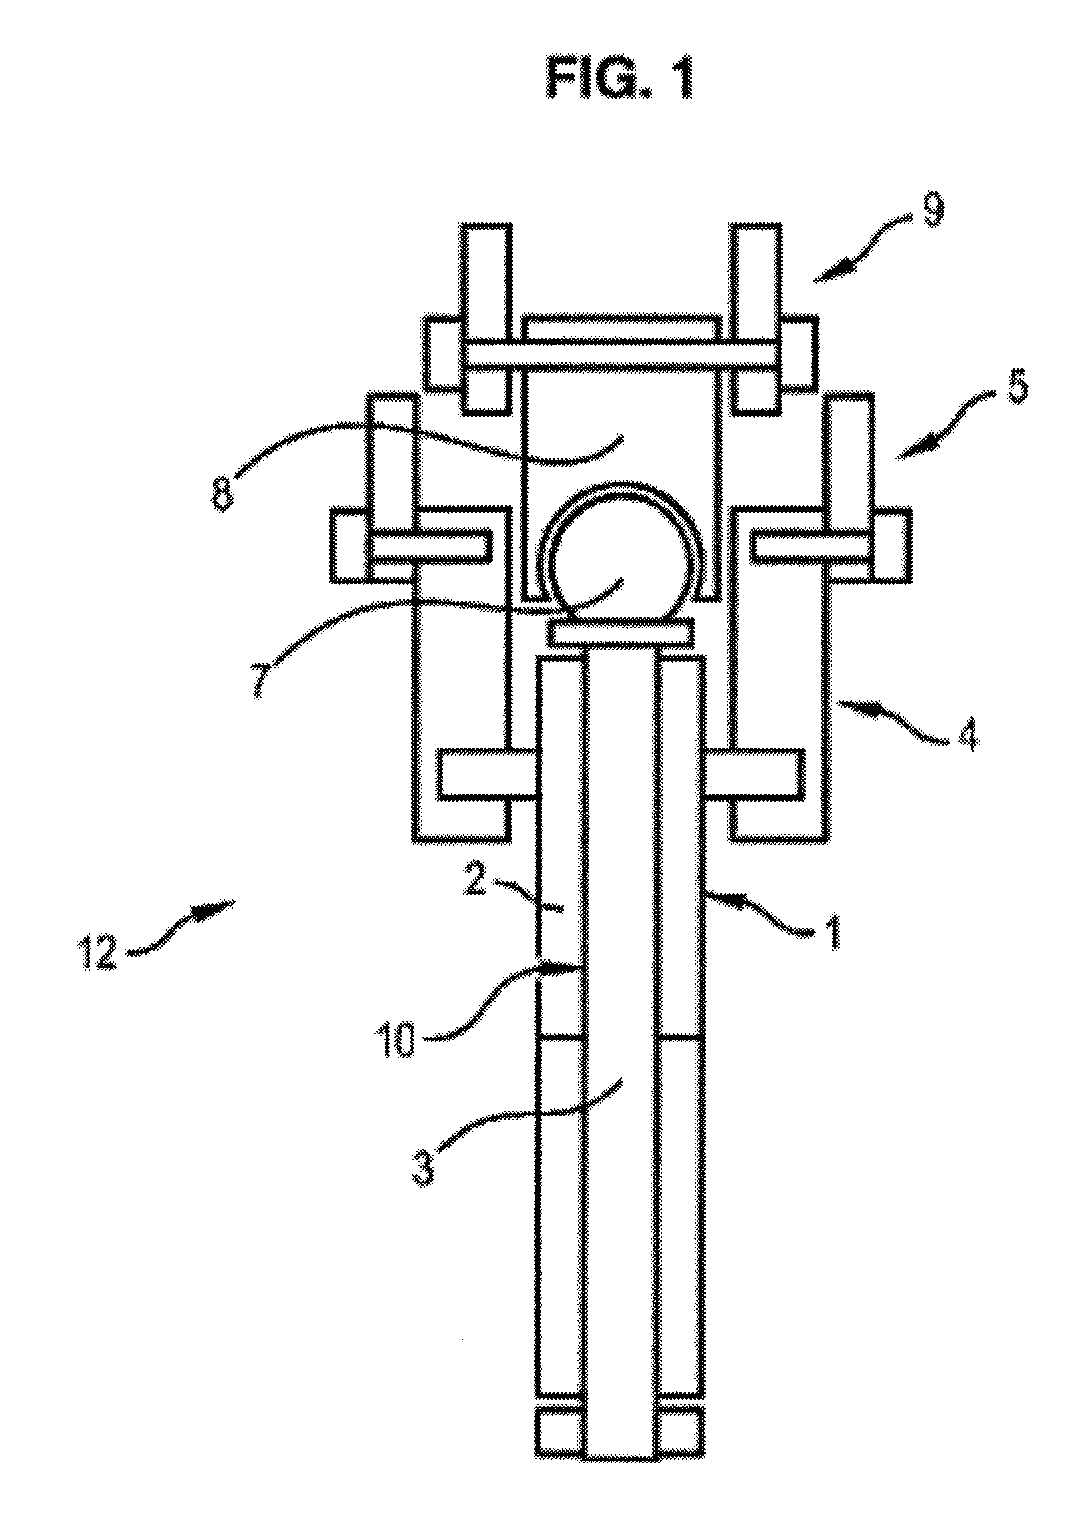 Device for detecting breakage of a primary path in a flight control actuator